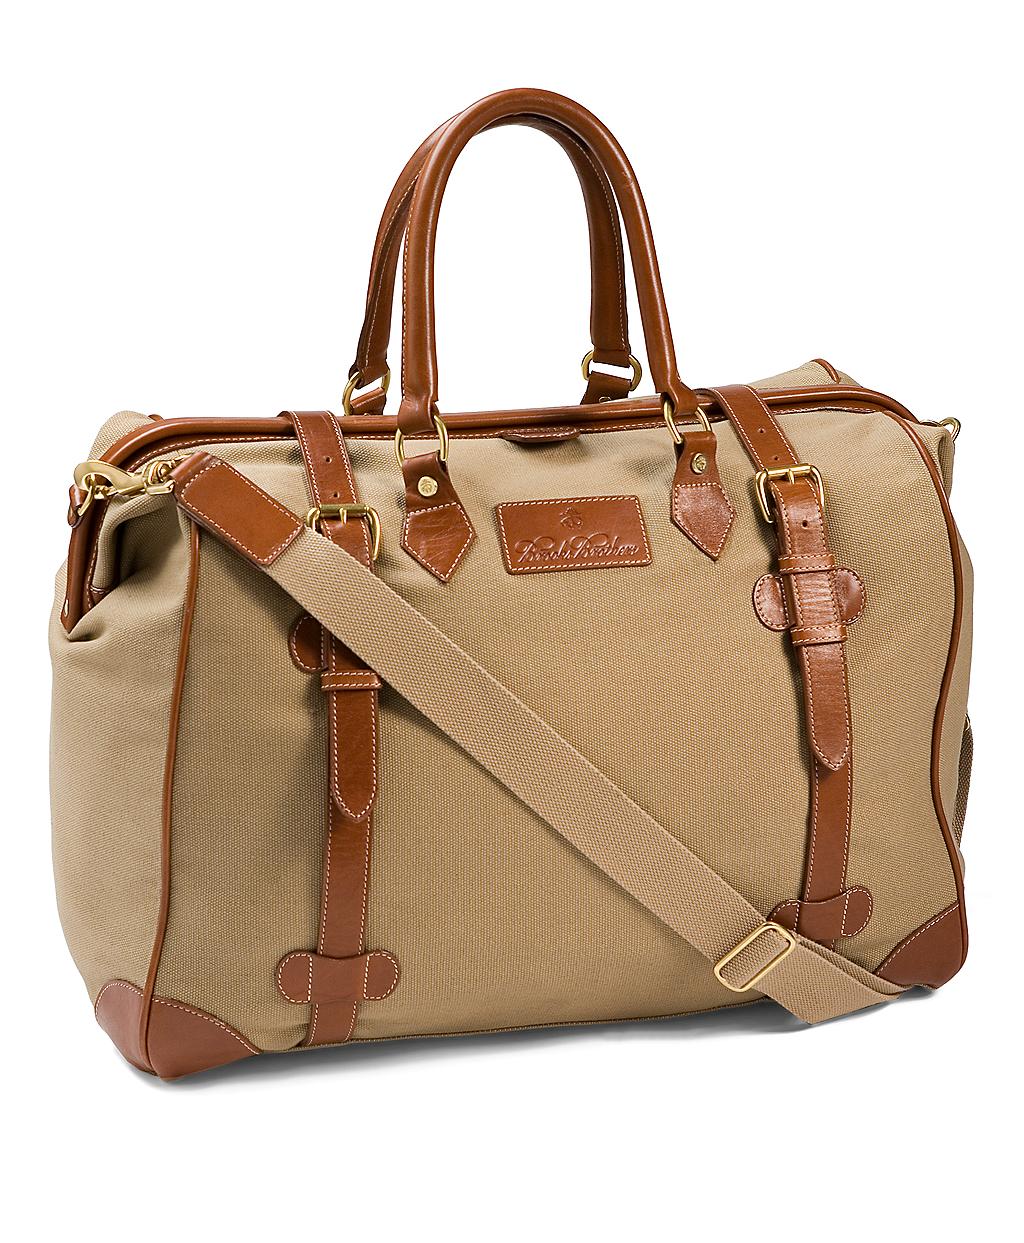 Brooks Brothers Canvas Leather Travel Bag in British-Tan (Brown) for Men - Lyst